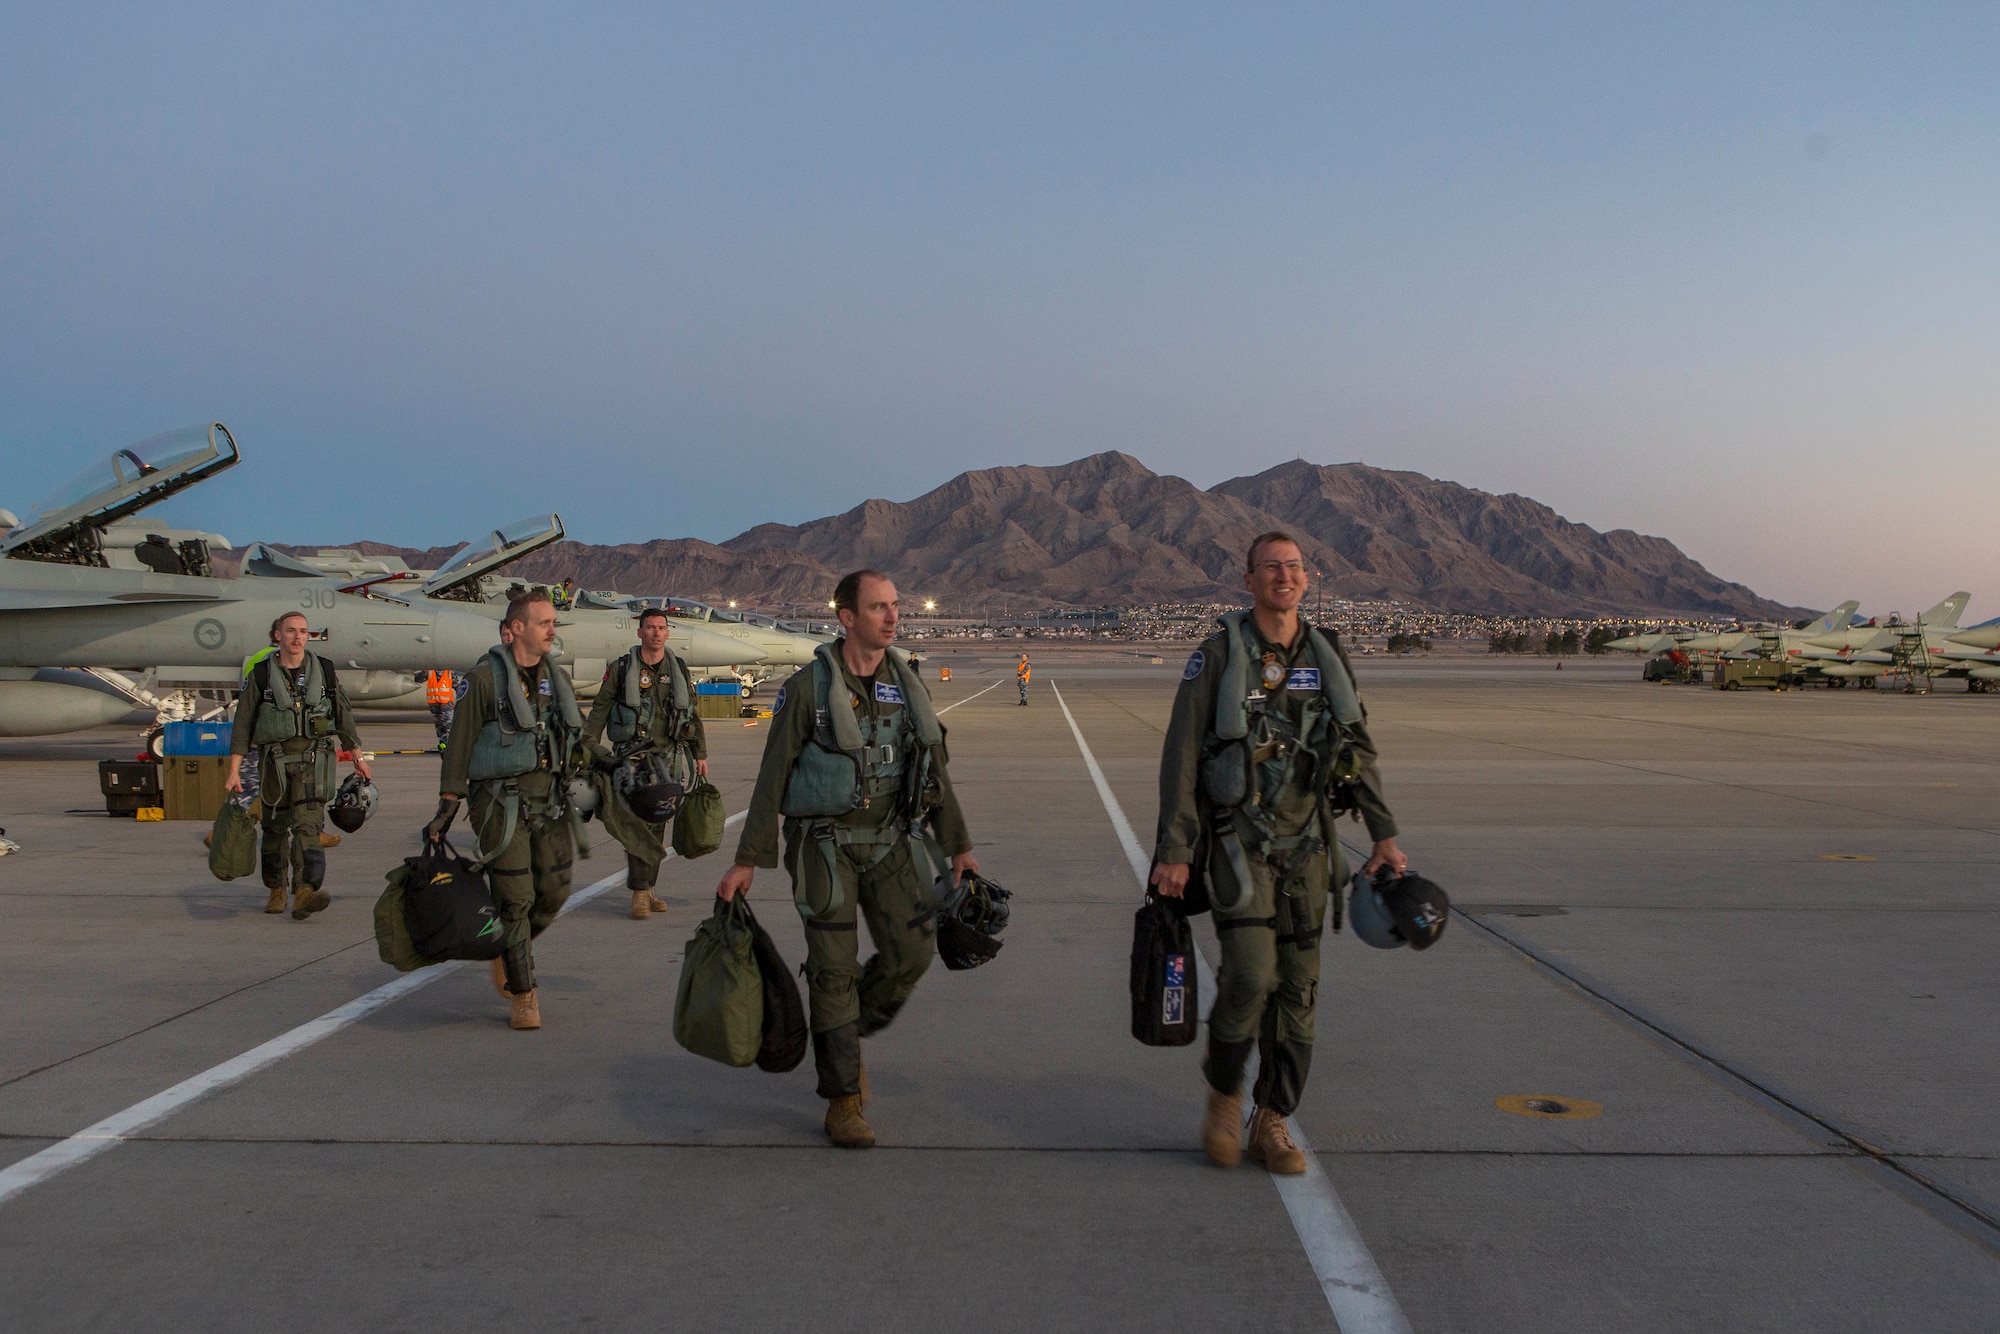 Number 6 Squadron aircrew walk across the flightline at Nellis Air Force Base, Nevada, after transitting from Australia for Exercise Red Flag 18-1. (Courtesy Photo)